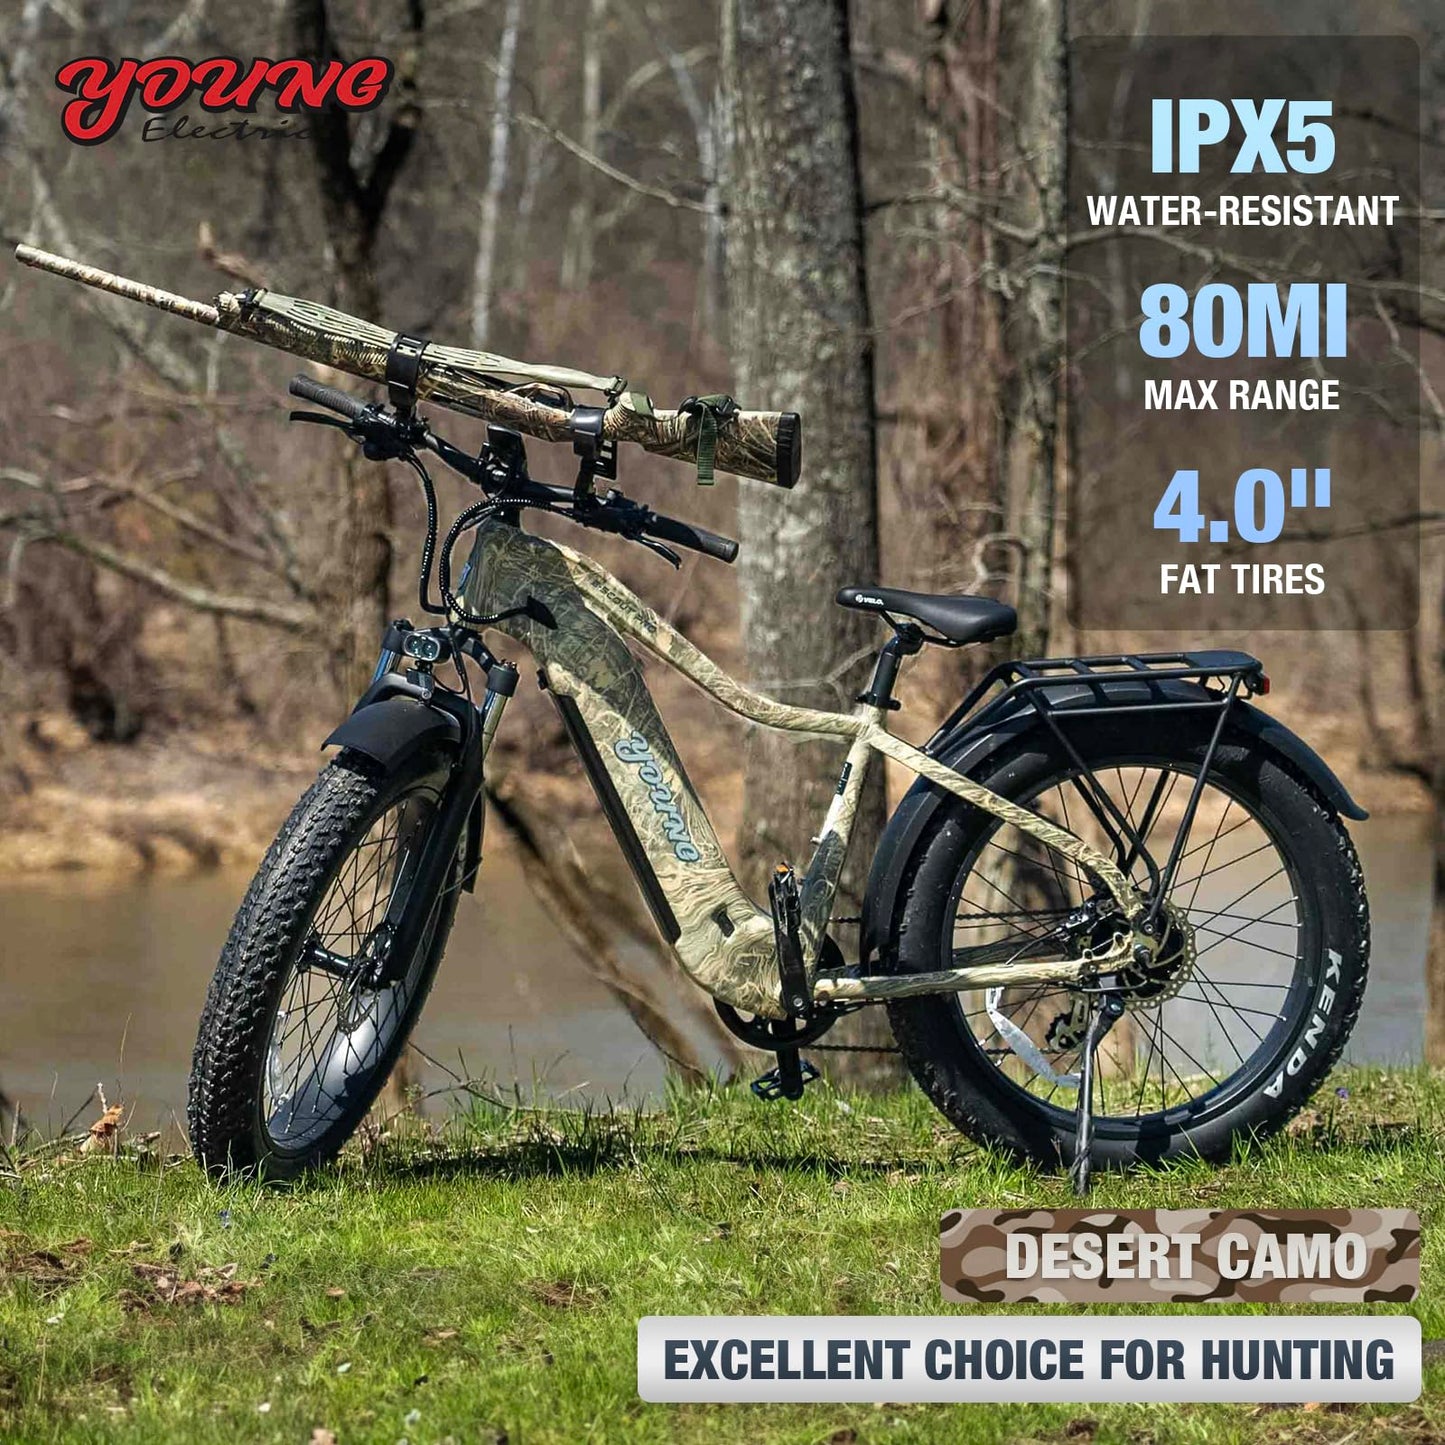 E-Scout PRO, 750W Young Electric Bike 48V/20Ah LG Battery with 3A Fast Charger, Up to 80Mi 28MPH, 26''x4.0'' Fat Tire Mountain Snow Beach Off-Road Adult Ebike